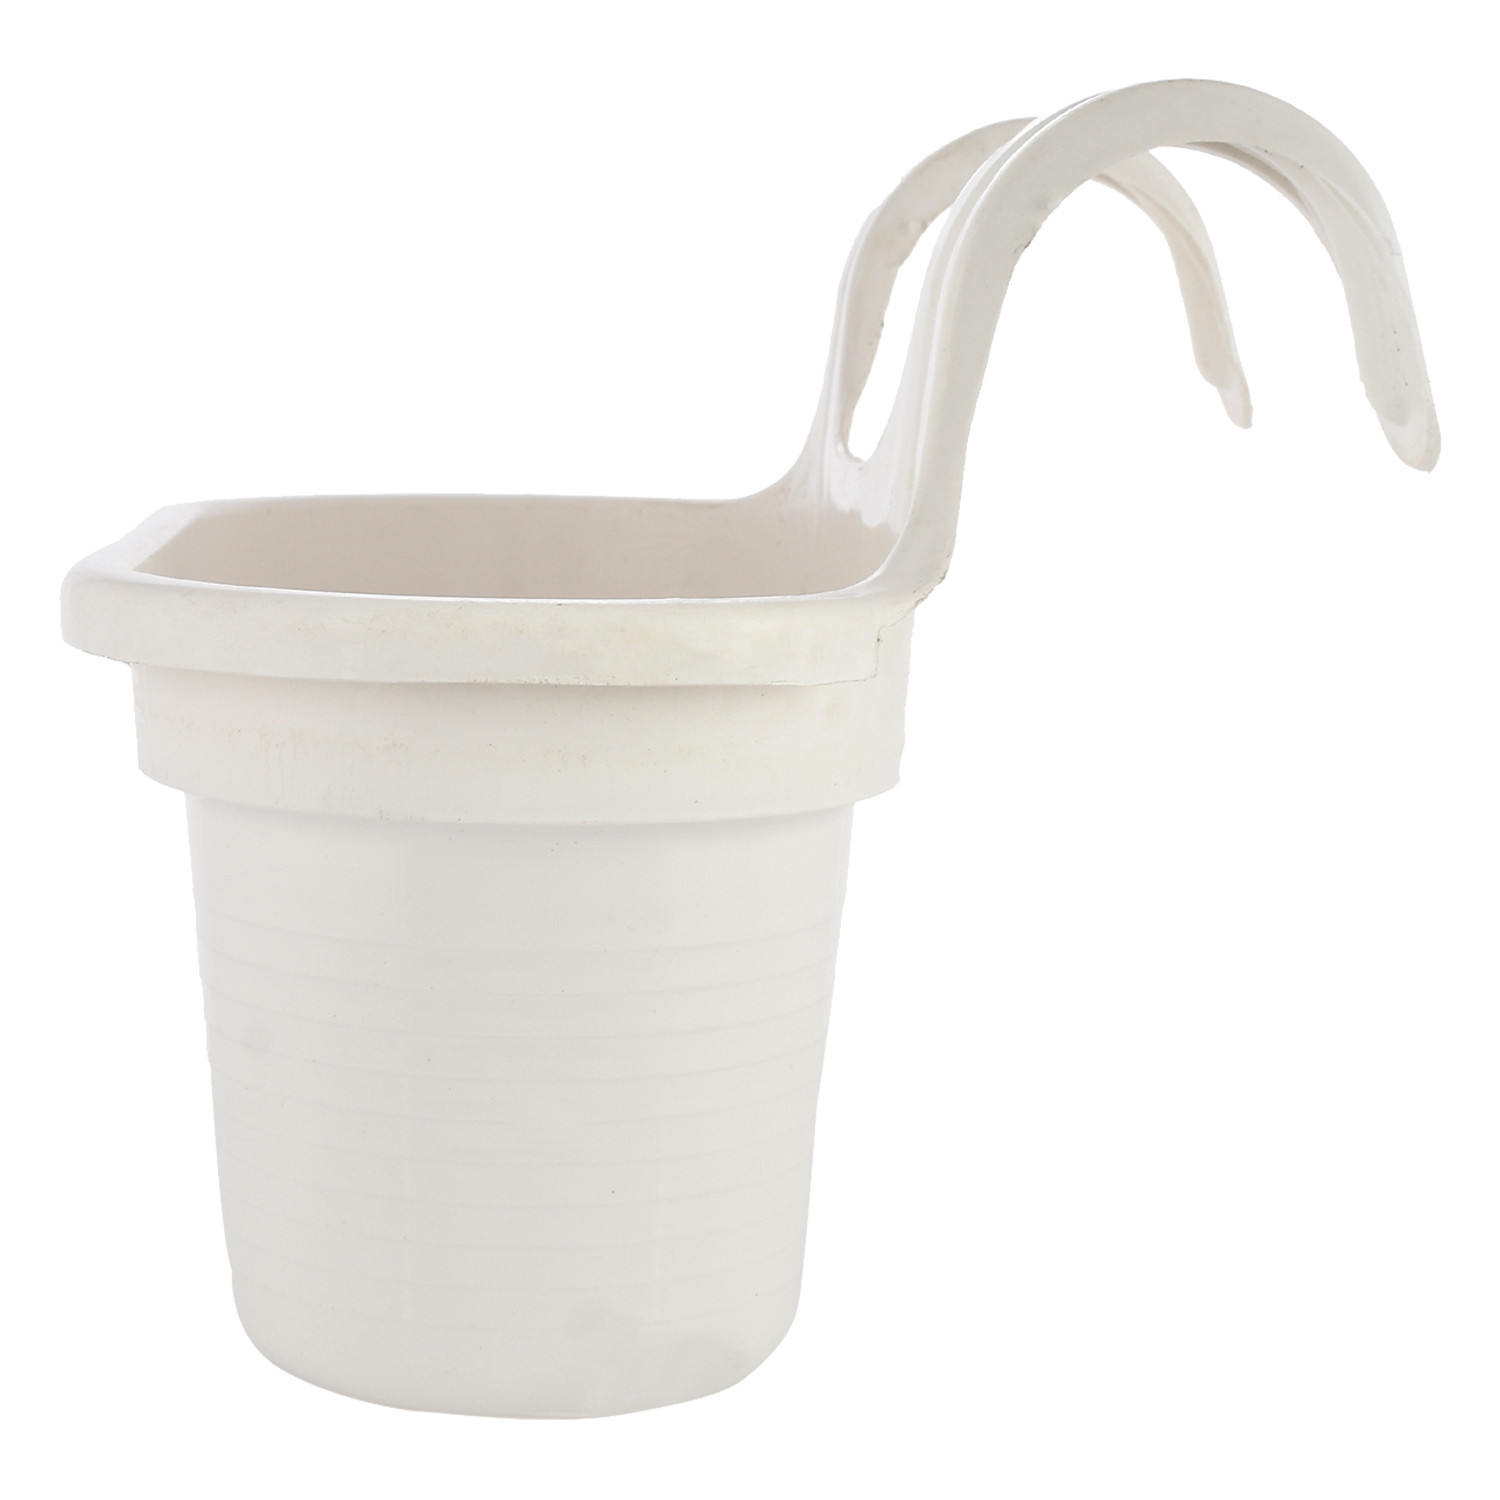 Kuber Industries Hanging Flower Pot|Double Hook Plant Container|Durable Plastic Glossy Finish Pots for Home|Balcony|Garden|12 Inch (White)